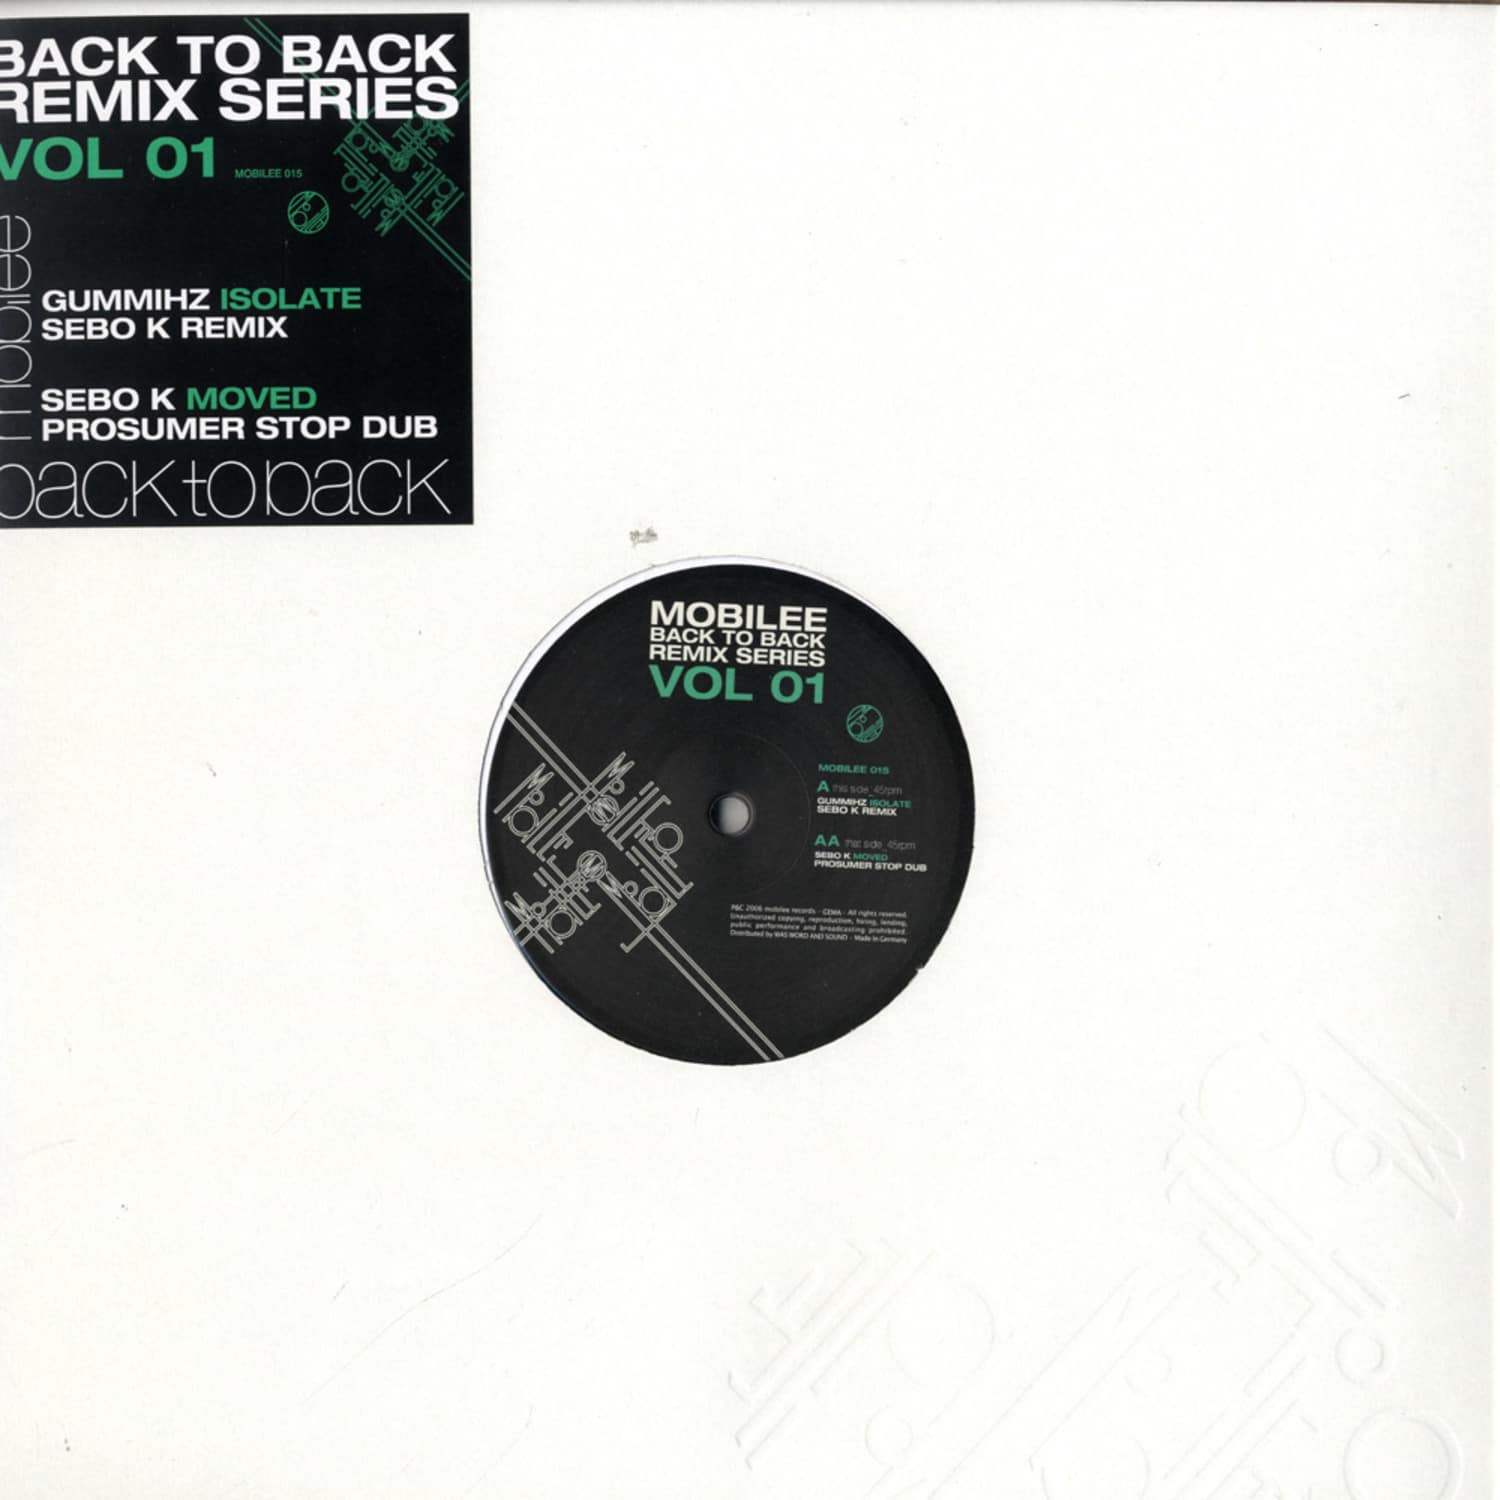 V/A - MOBILEE BACK TO BACK REMIX SERIES VOL. 1